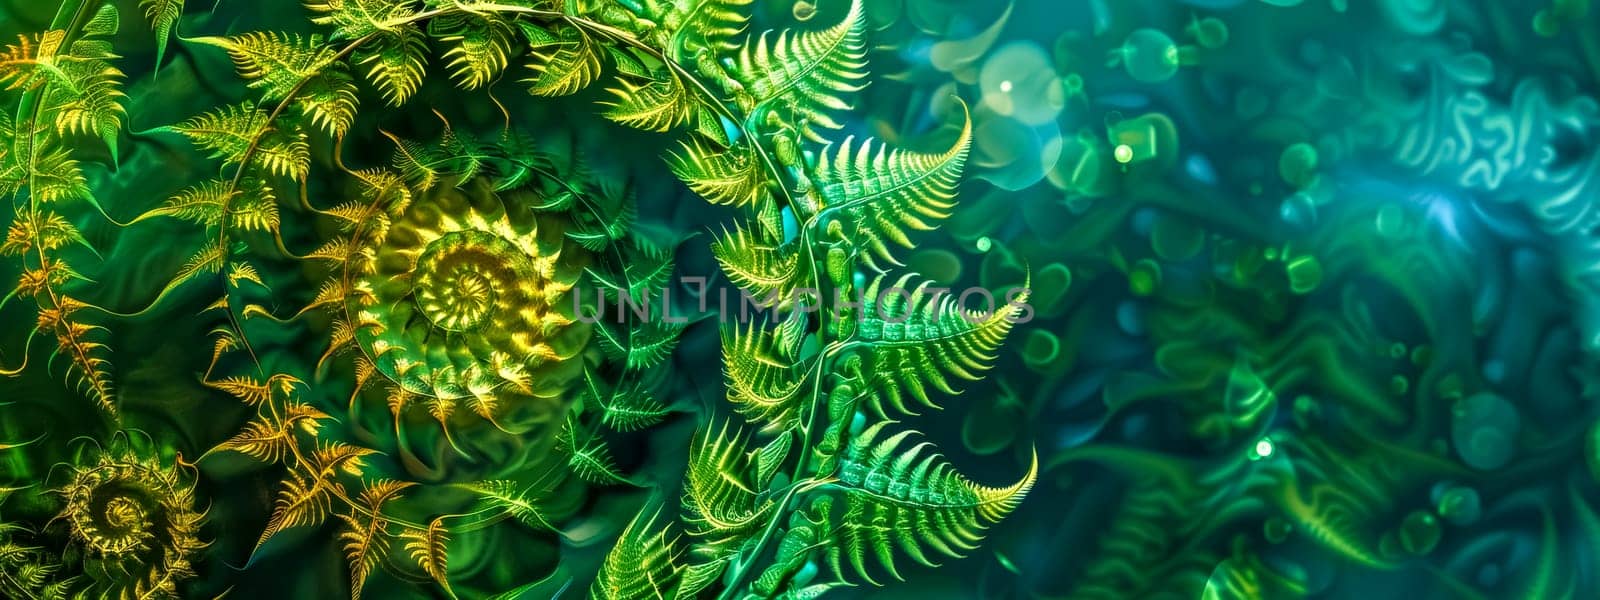 Abstract green fern pattern with bokeh lights by Edophoto